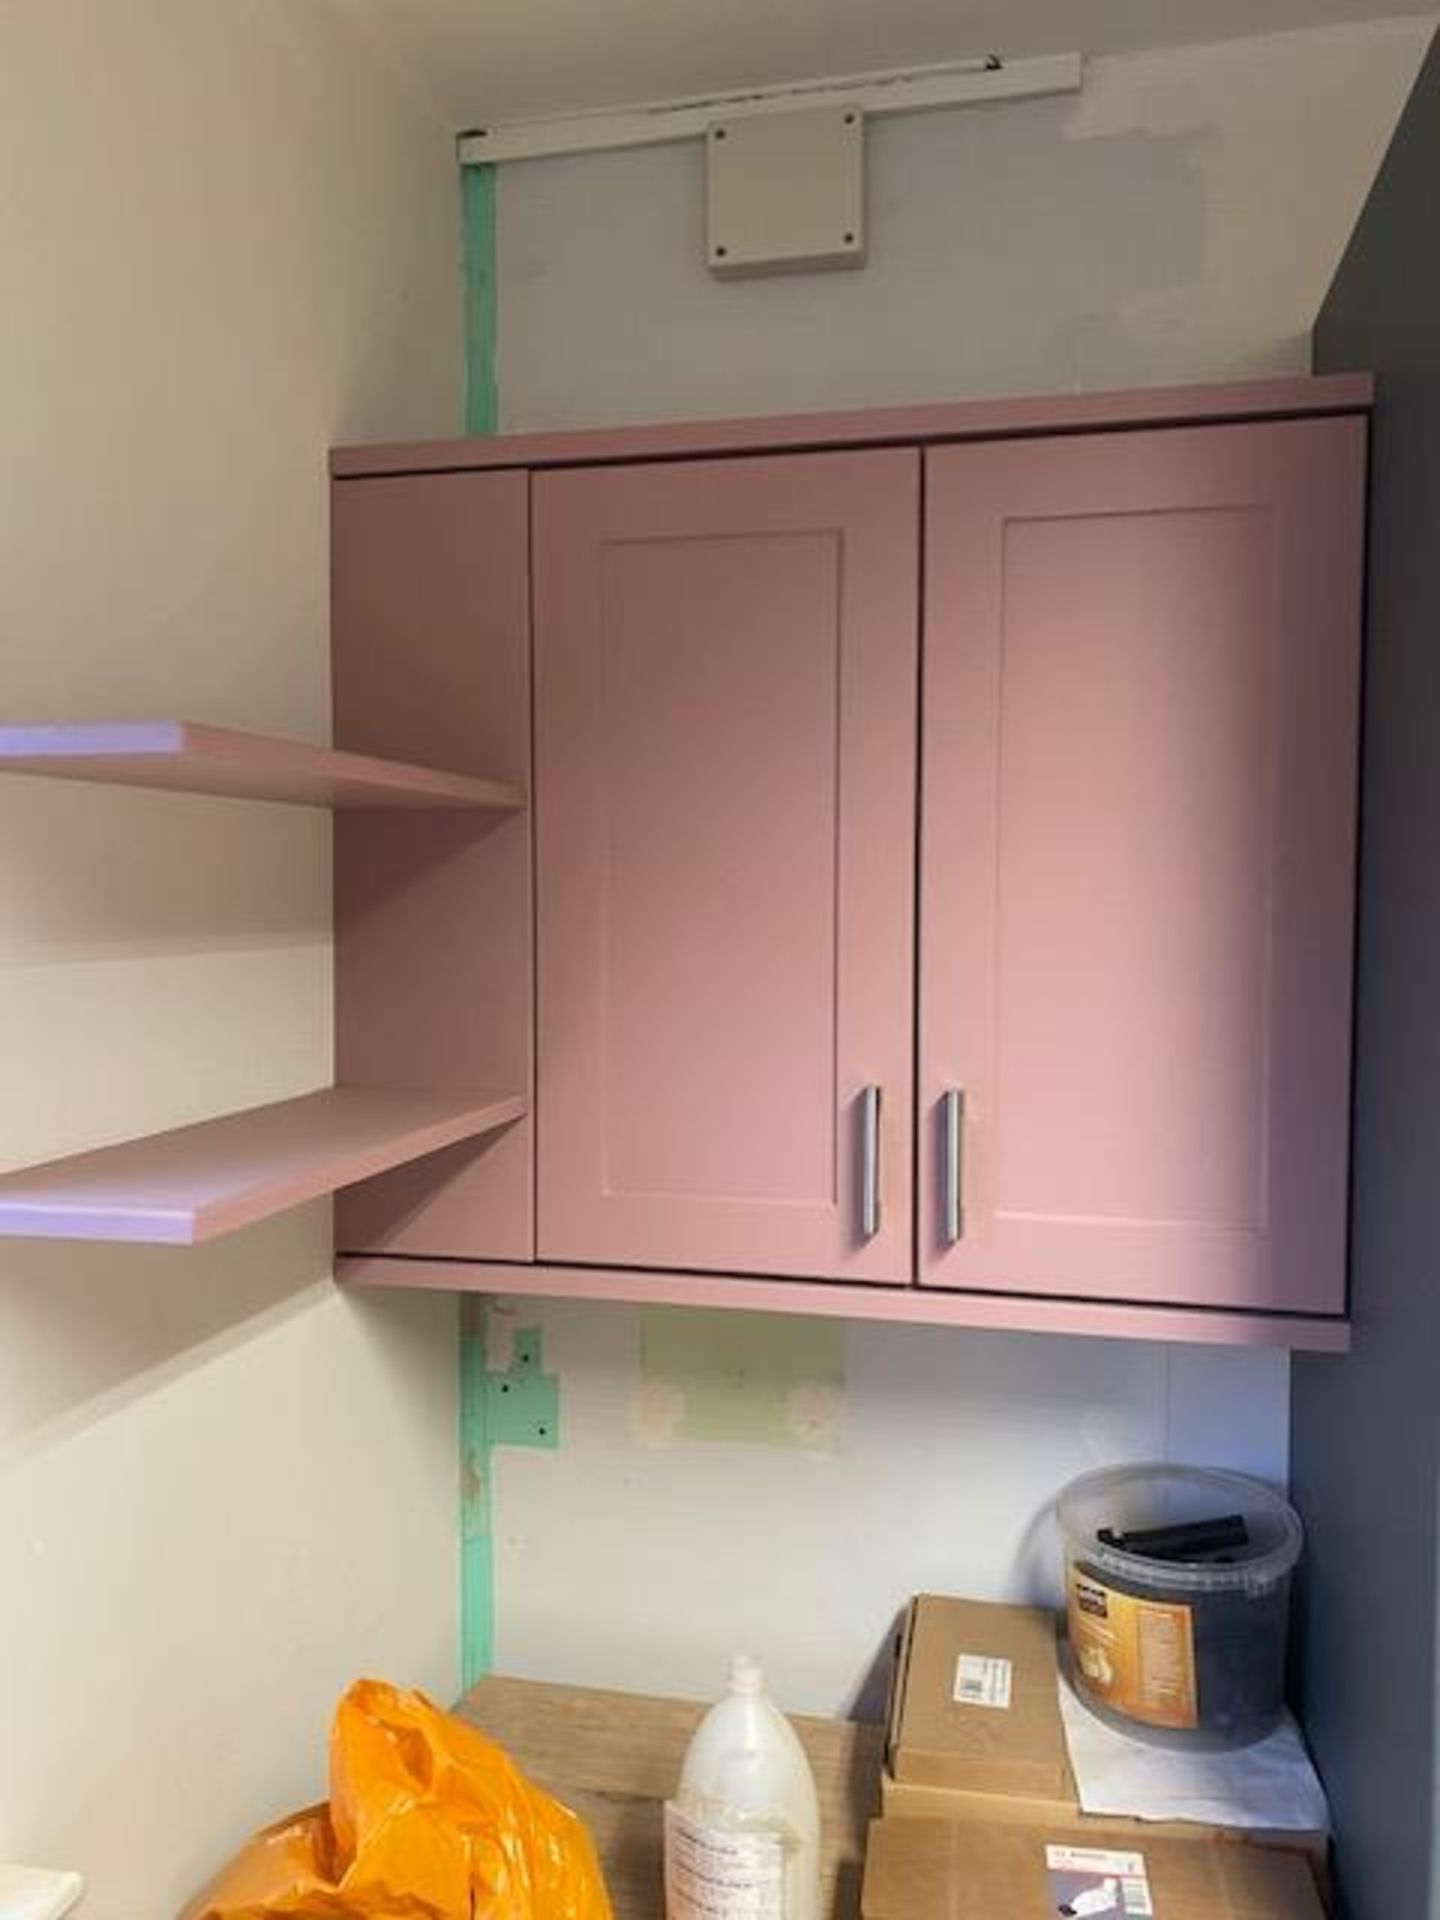 Part built display kitchen (as lotted, please note that appliances are not included) - Image 8 of 9